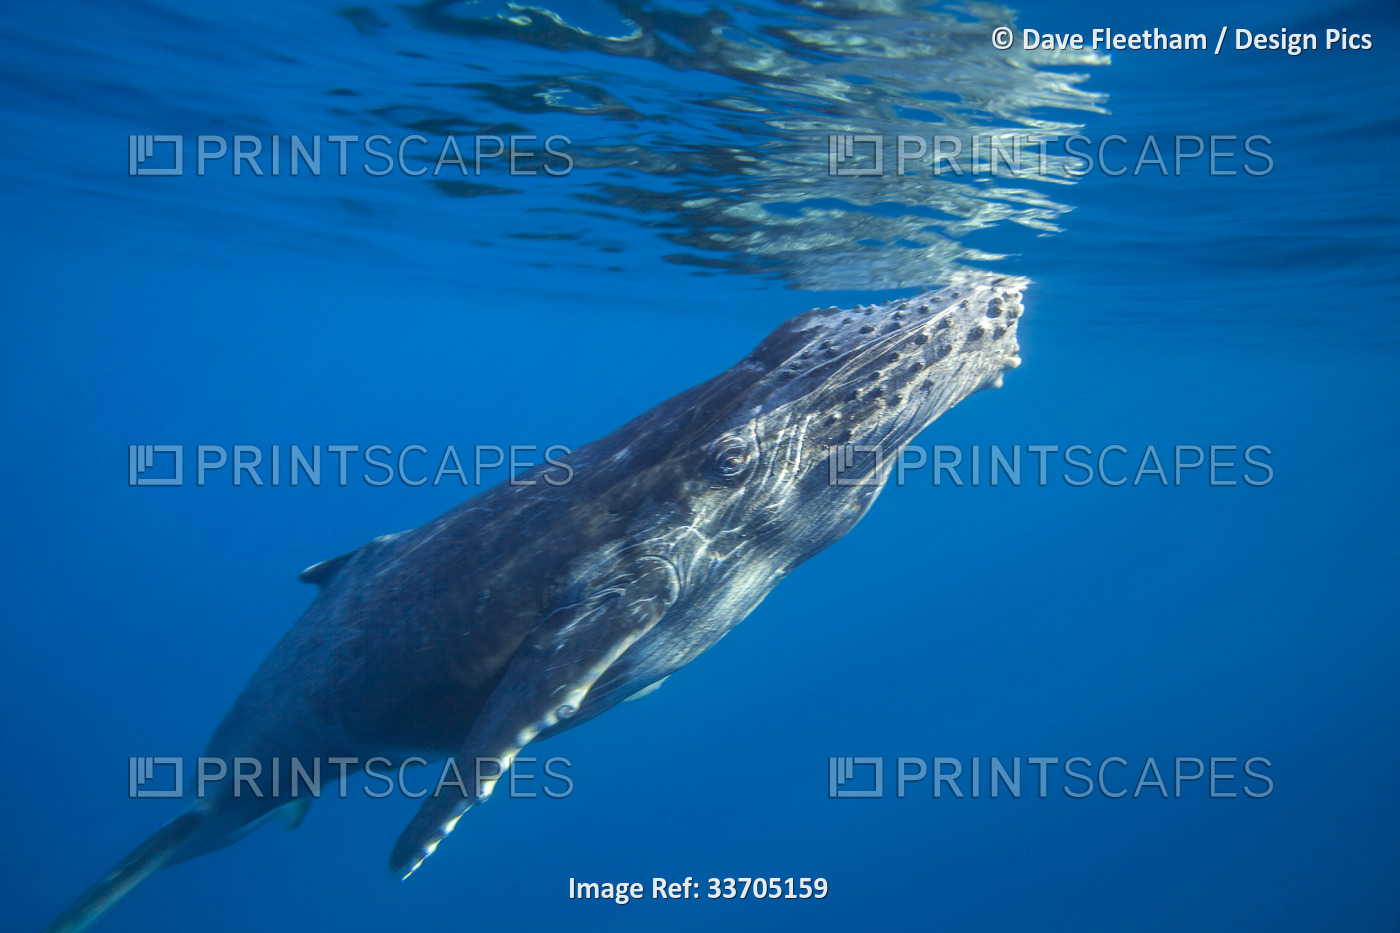 This curious Humpback whale (Megaptera novaeangliae) surfaces off the island of ...